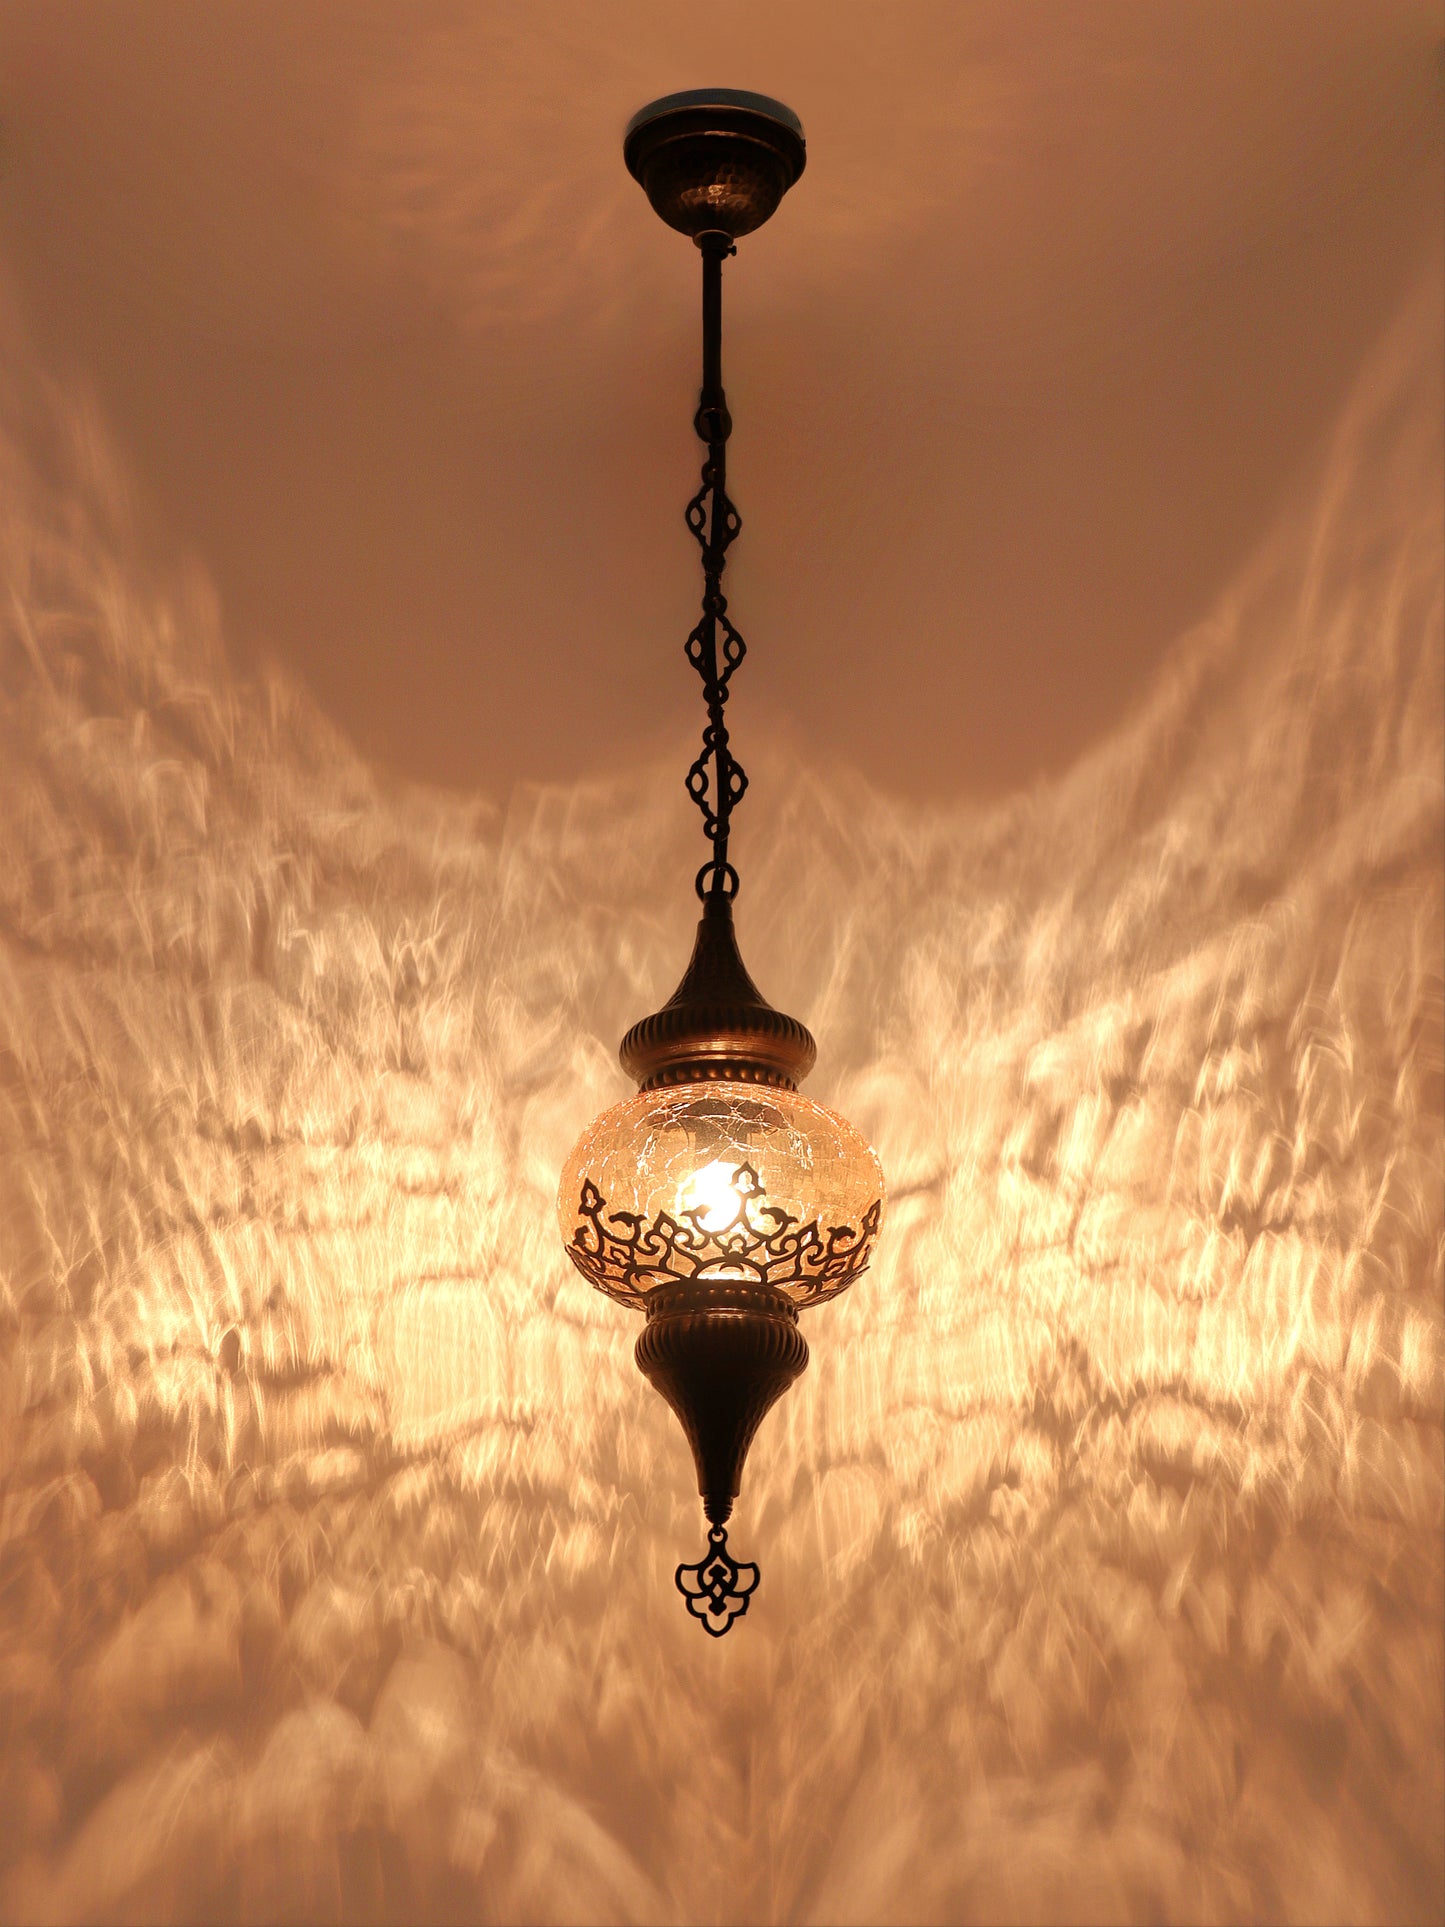 Turkish Glass Living Room Hanging Lamp Different Colors